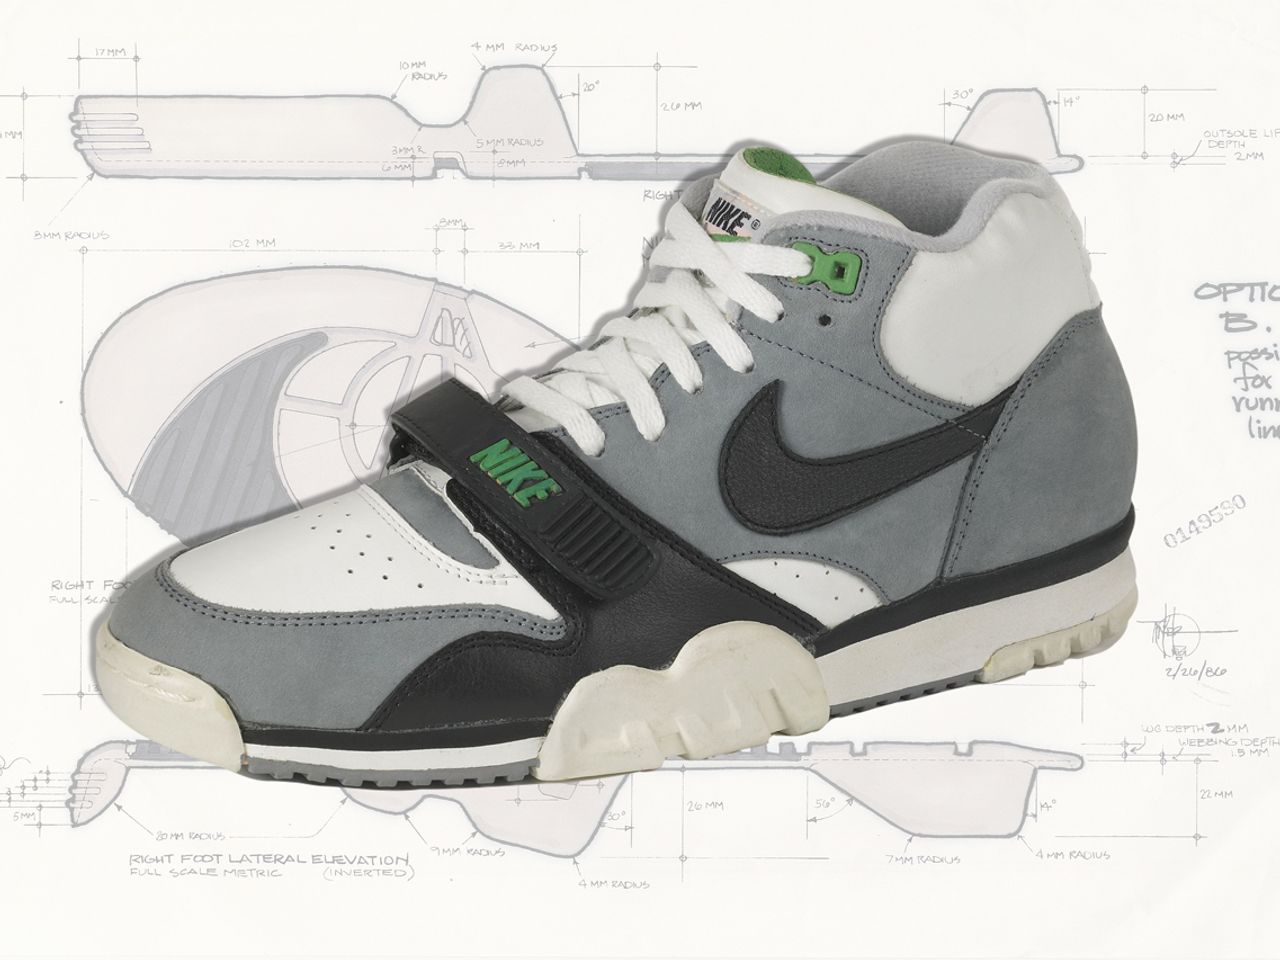 auteur Albany Uitpakken Five Facts You Need To Know About the Nike Air Trainer 1 - Sneaker Freaker